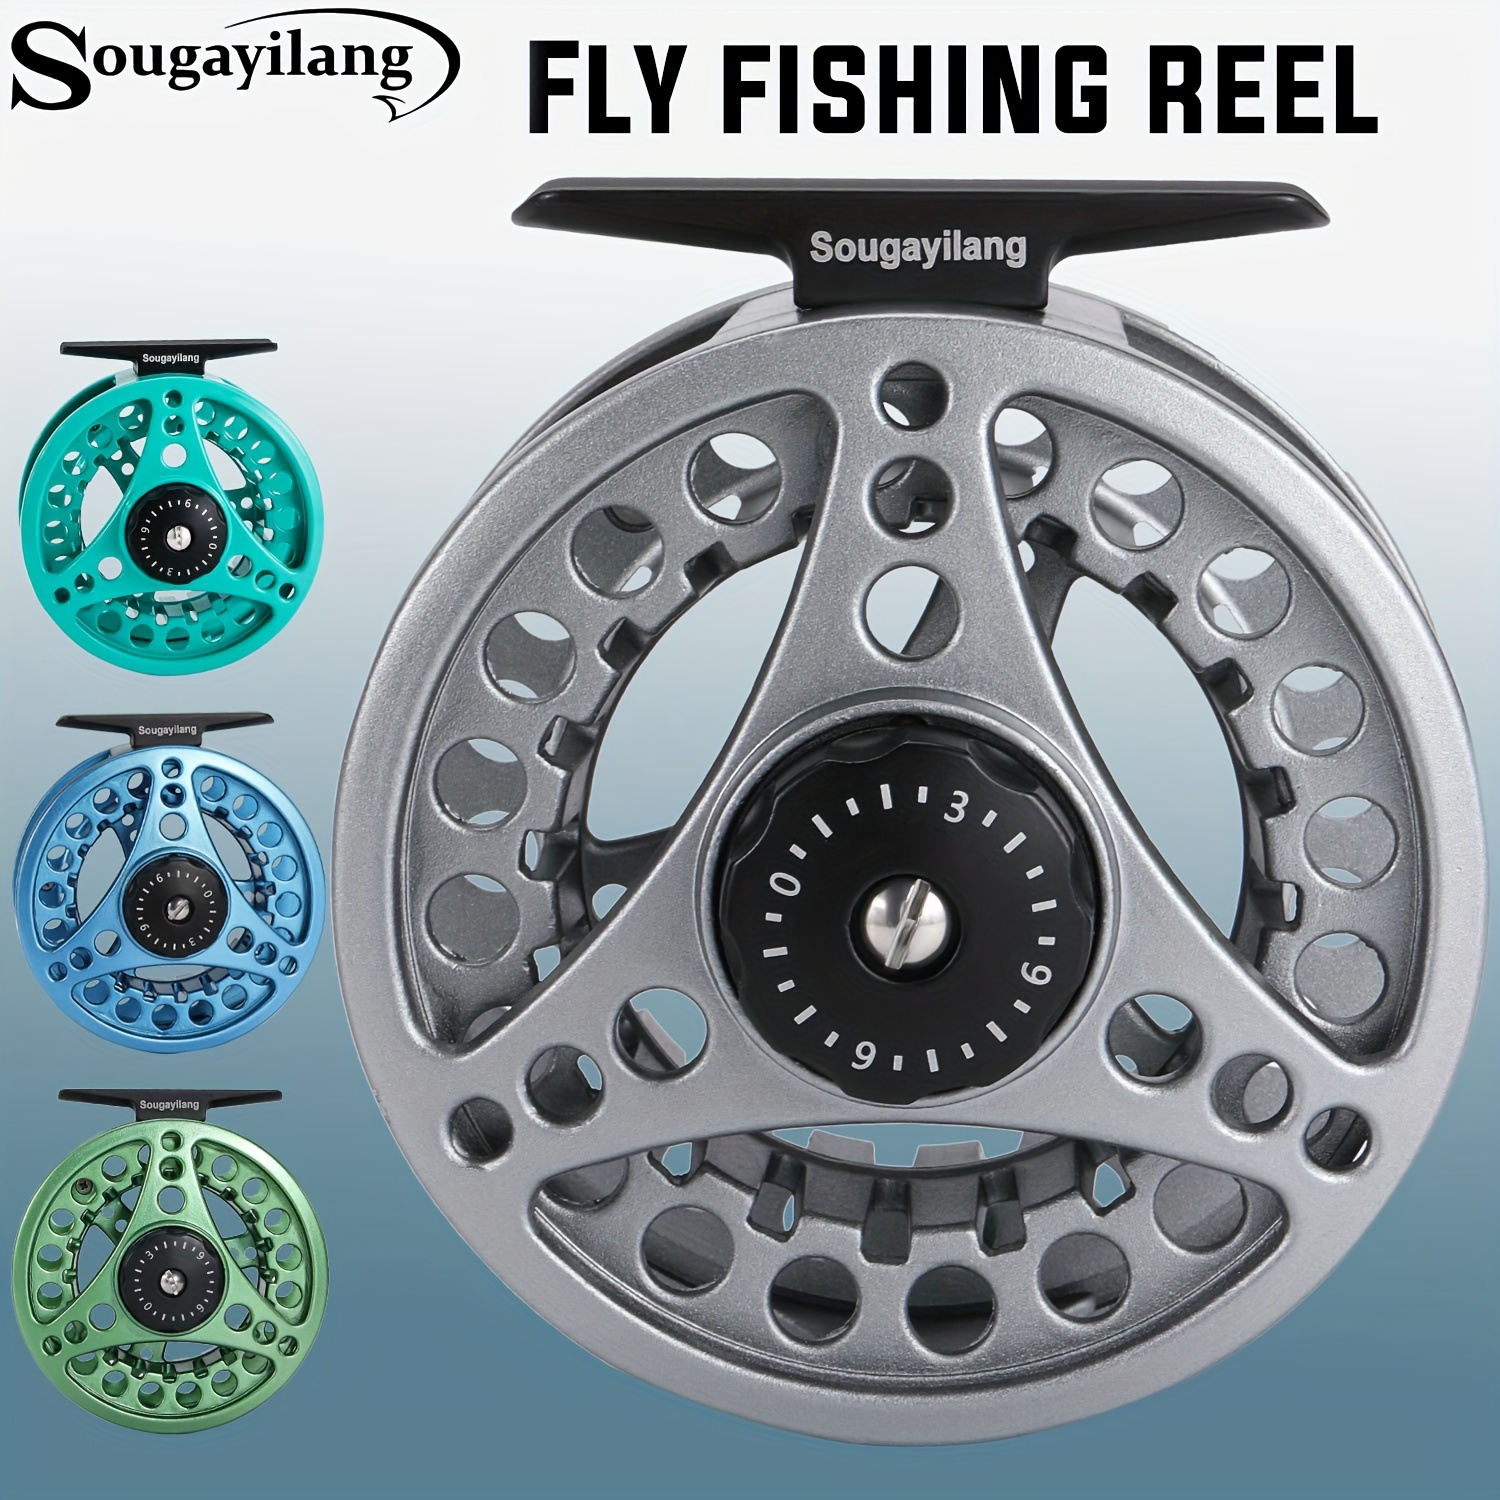 Sougayilang Fly Fishing Reel Large Arbor 2+1 BB With CNC-machined Aluminum Alloy Body And Spool In Fly Reel Sizes 7/8